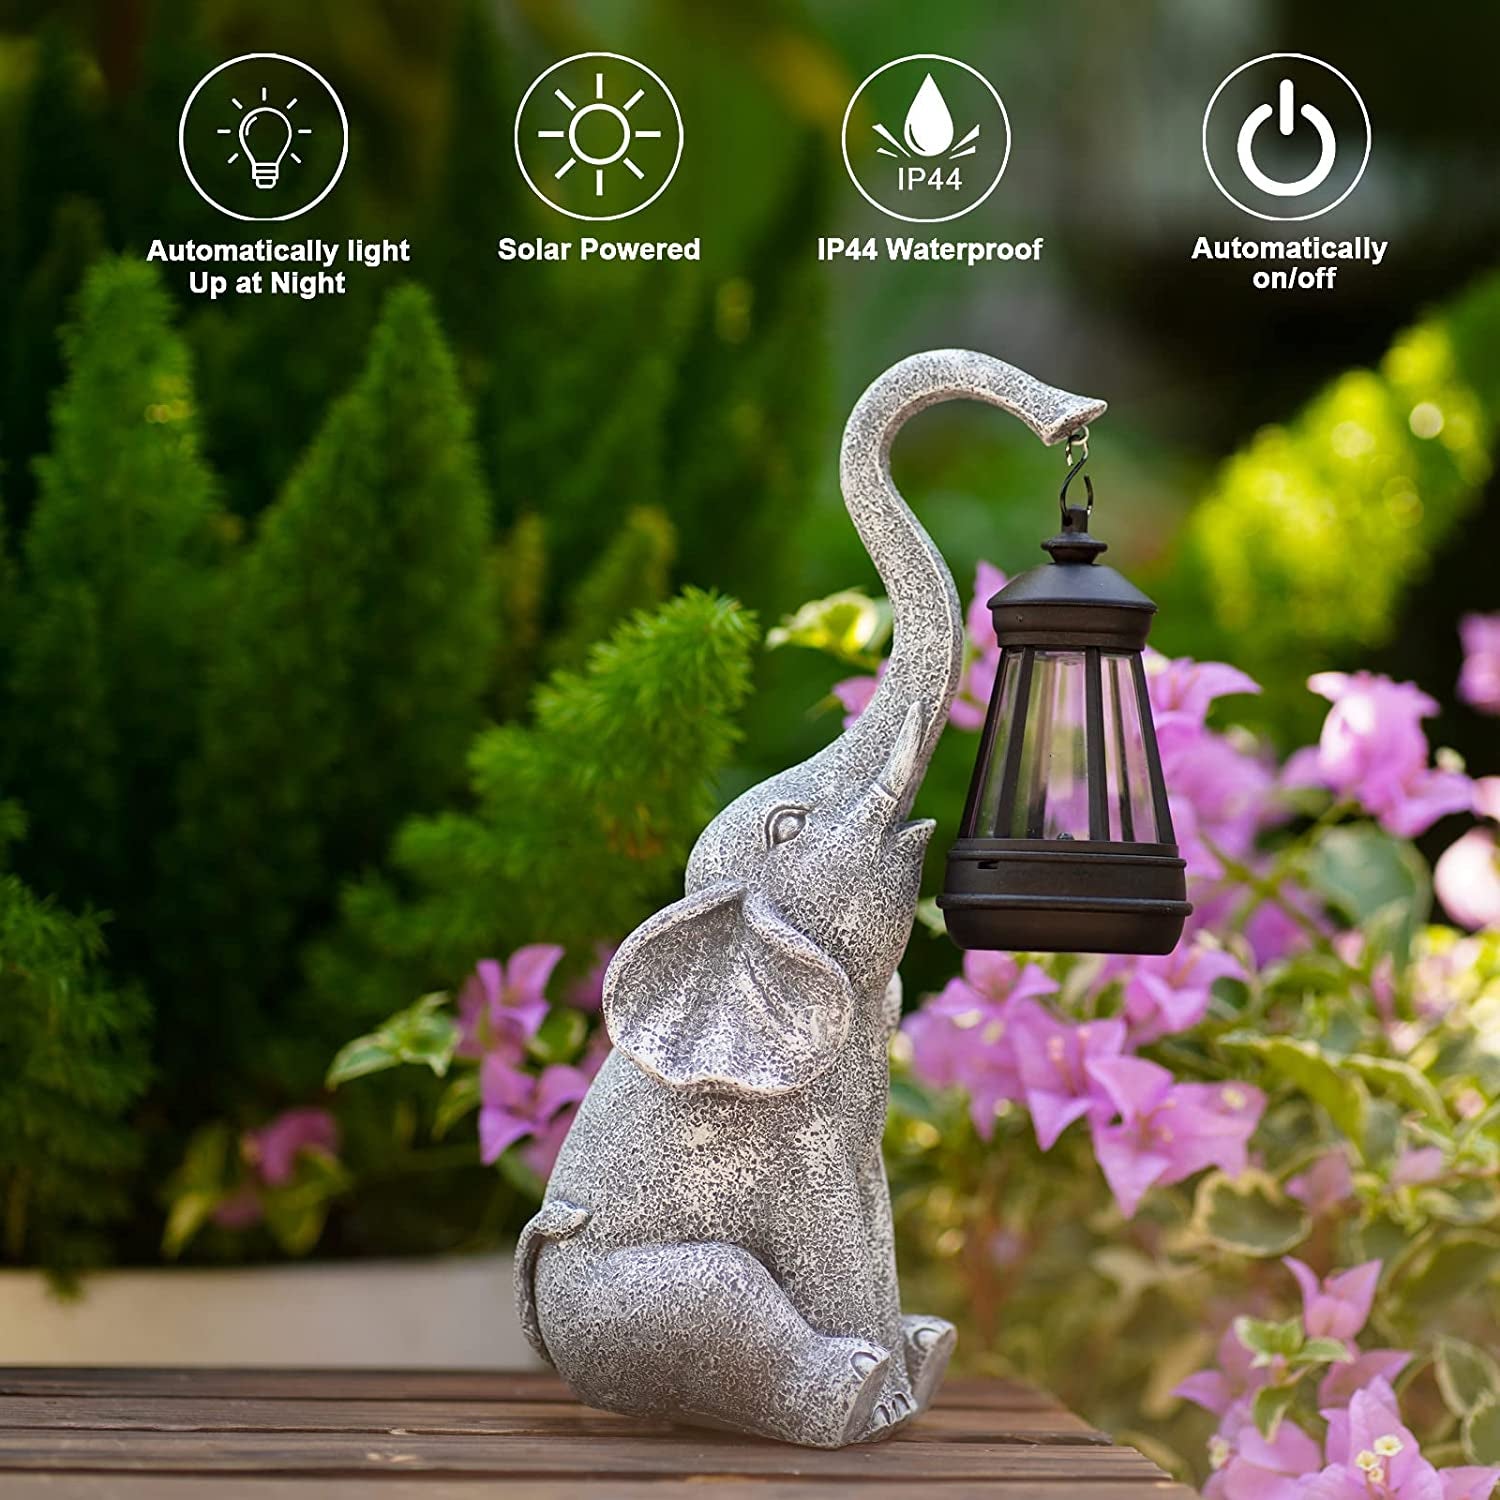 Solar-Powered Elephant Statue for Garden - Eco-Friendly Outdoor Decor with LED Lighting, Weather-Resistant for Pathways & Flowerbeds, Unique Garden Gift for Women & Animal Lovers